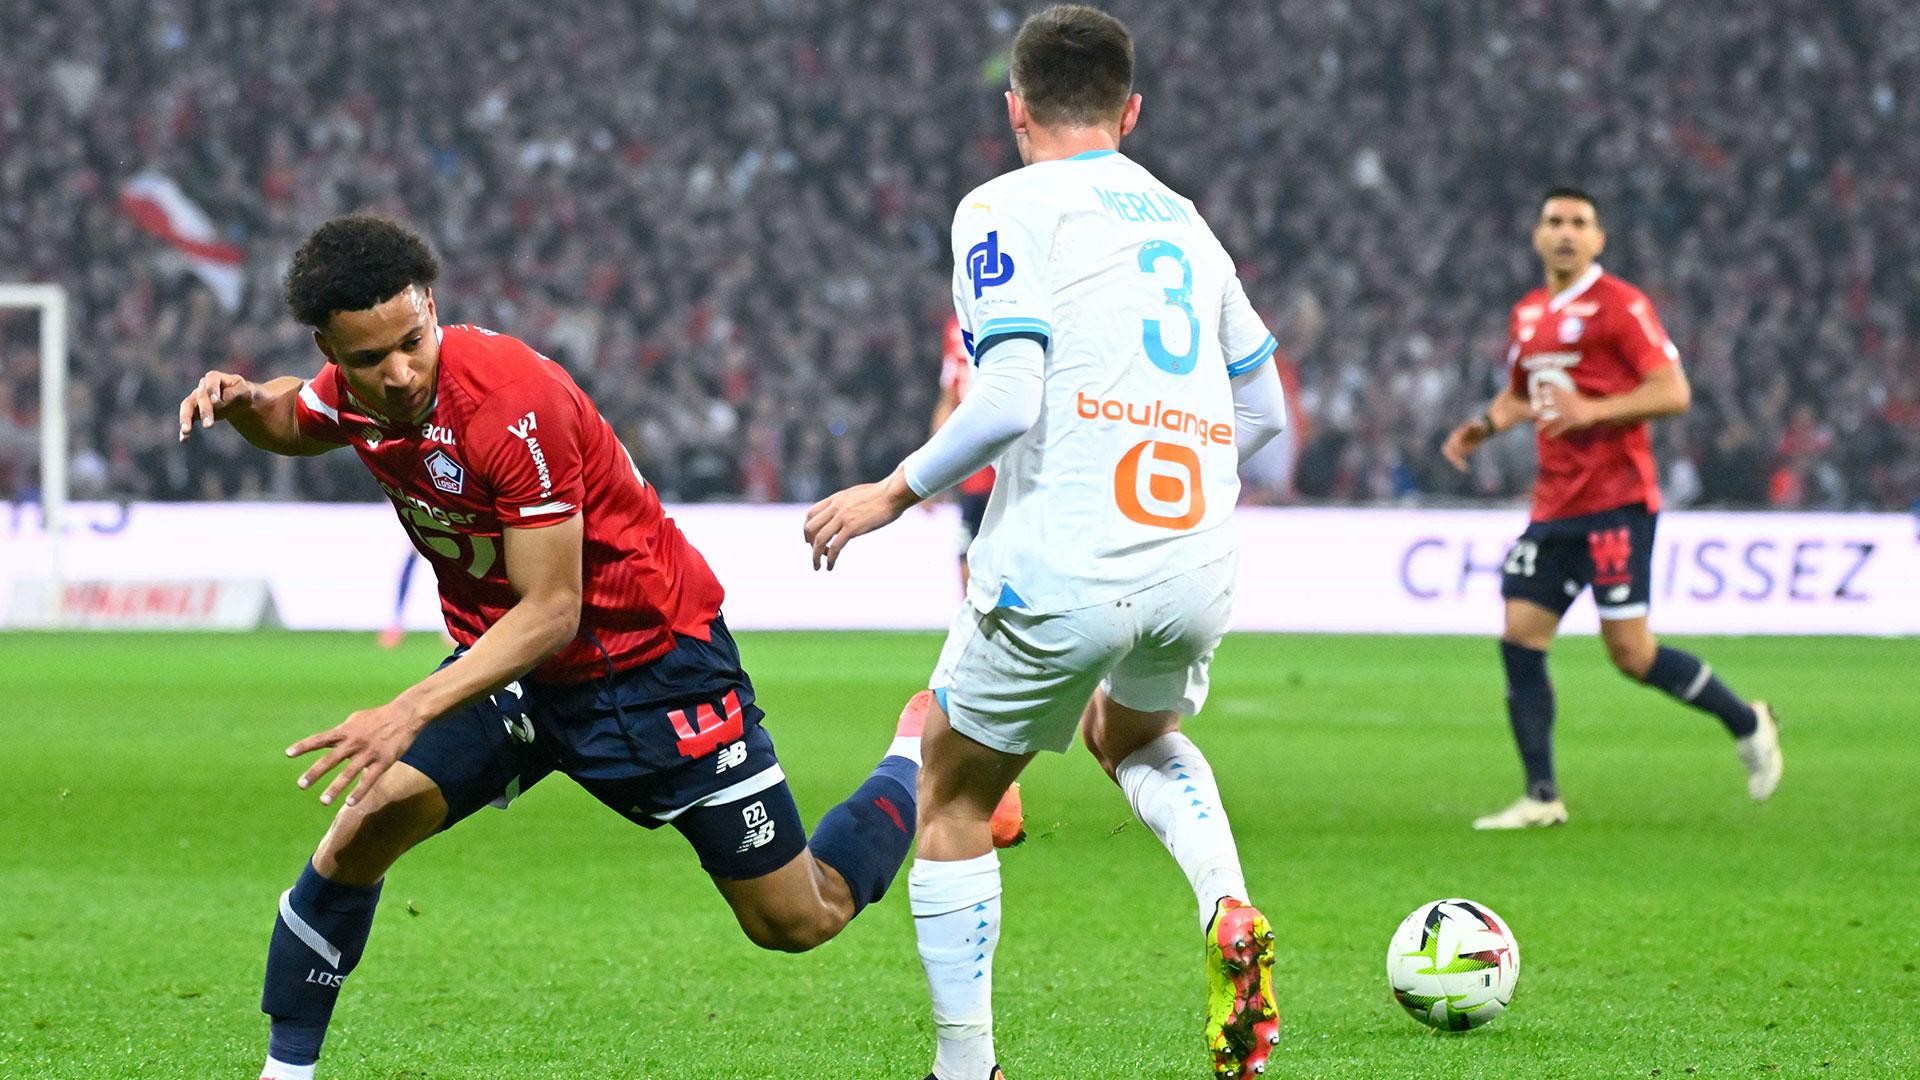 VIDEO | Ligue 1 Highlights: Lille vs Marseille